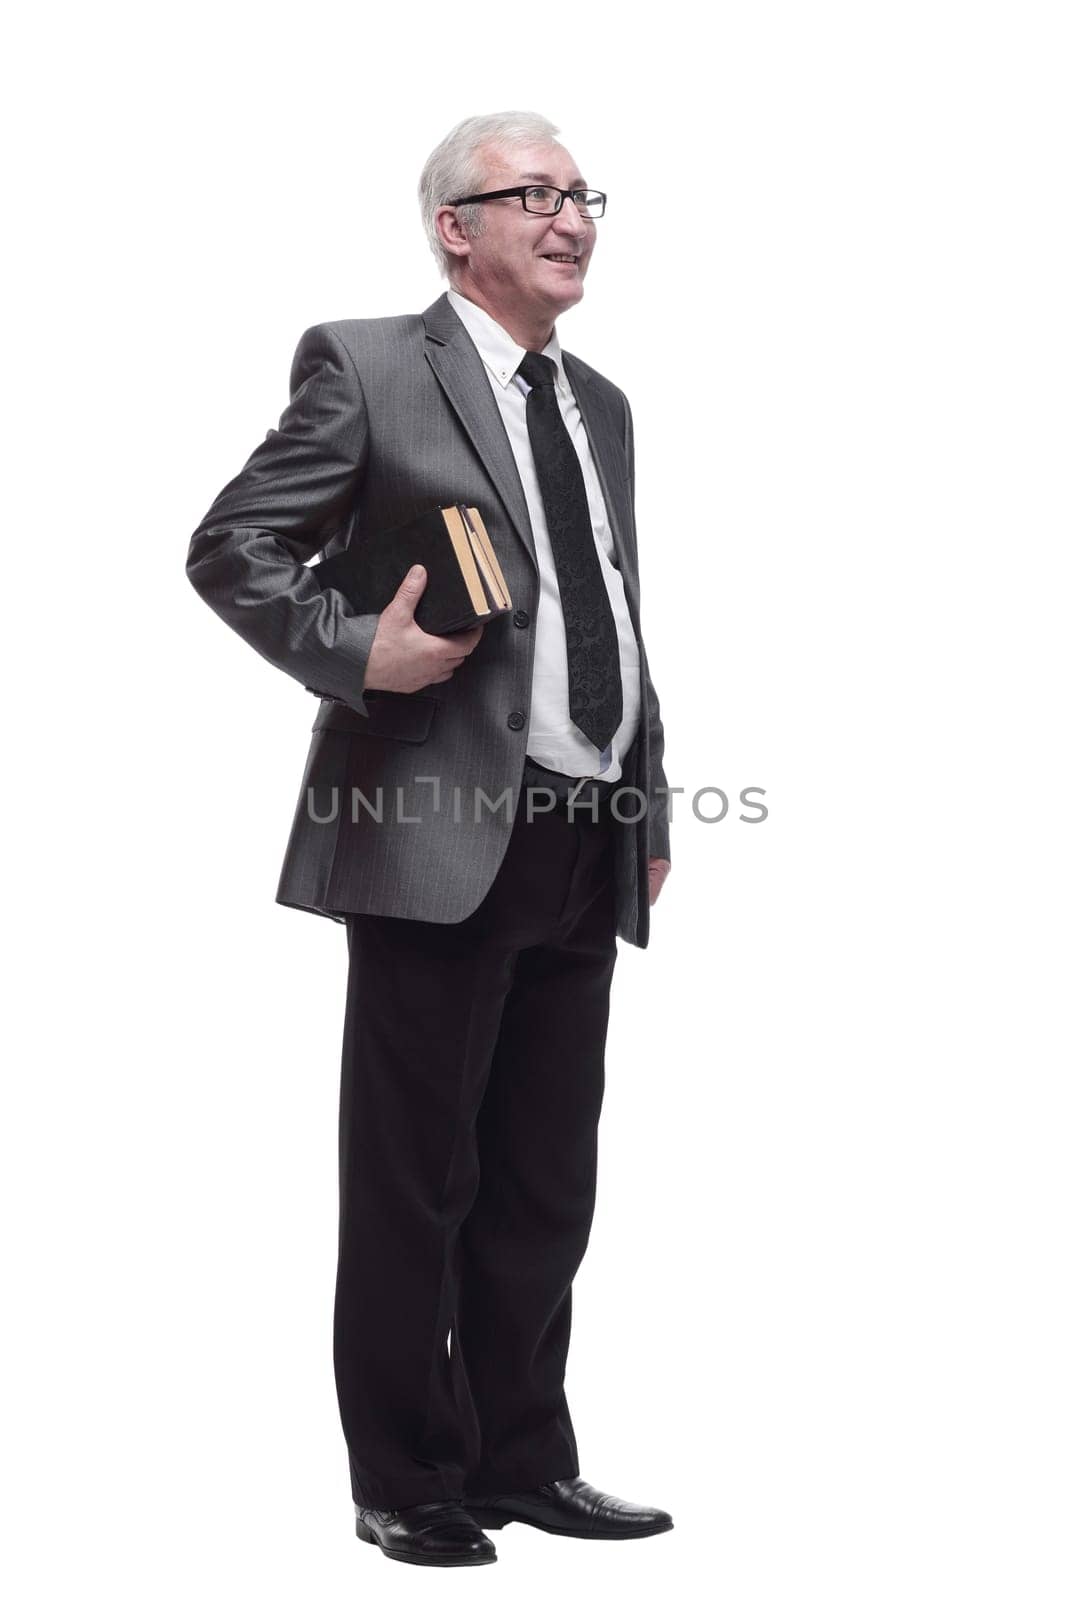 in full growth. smiling business man with a stack of books. isolated on a white background.